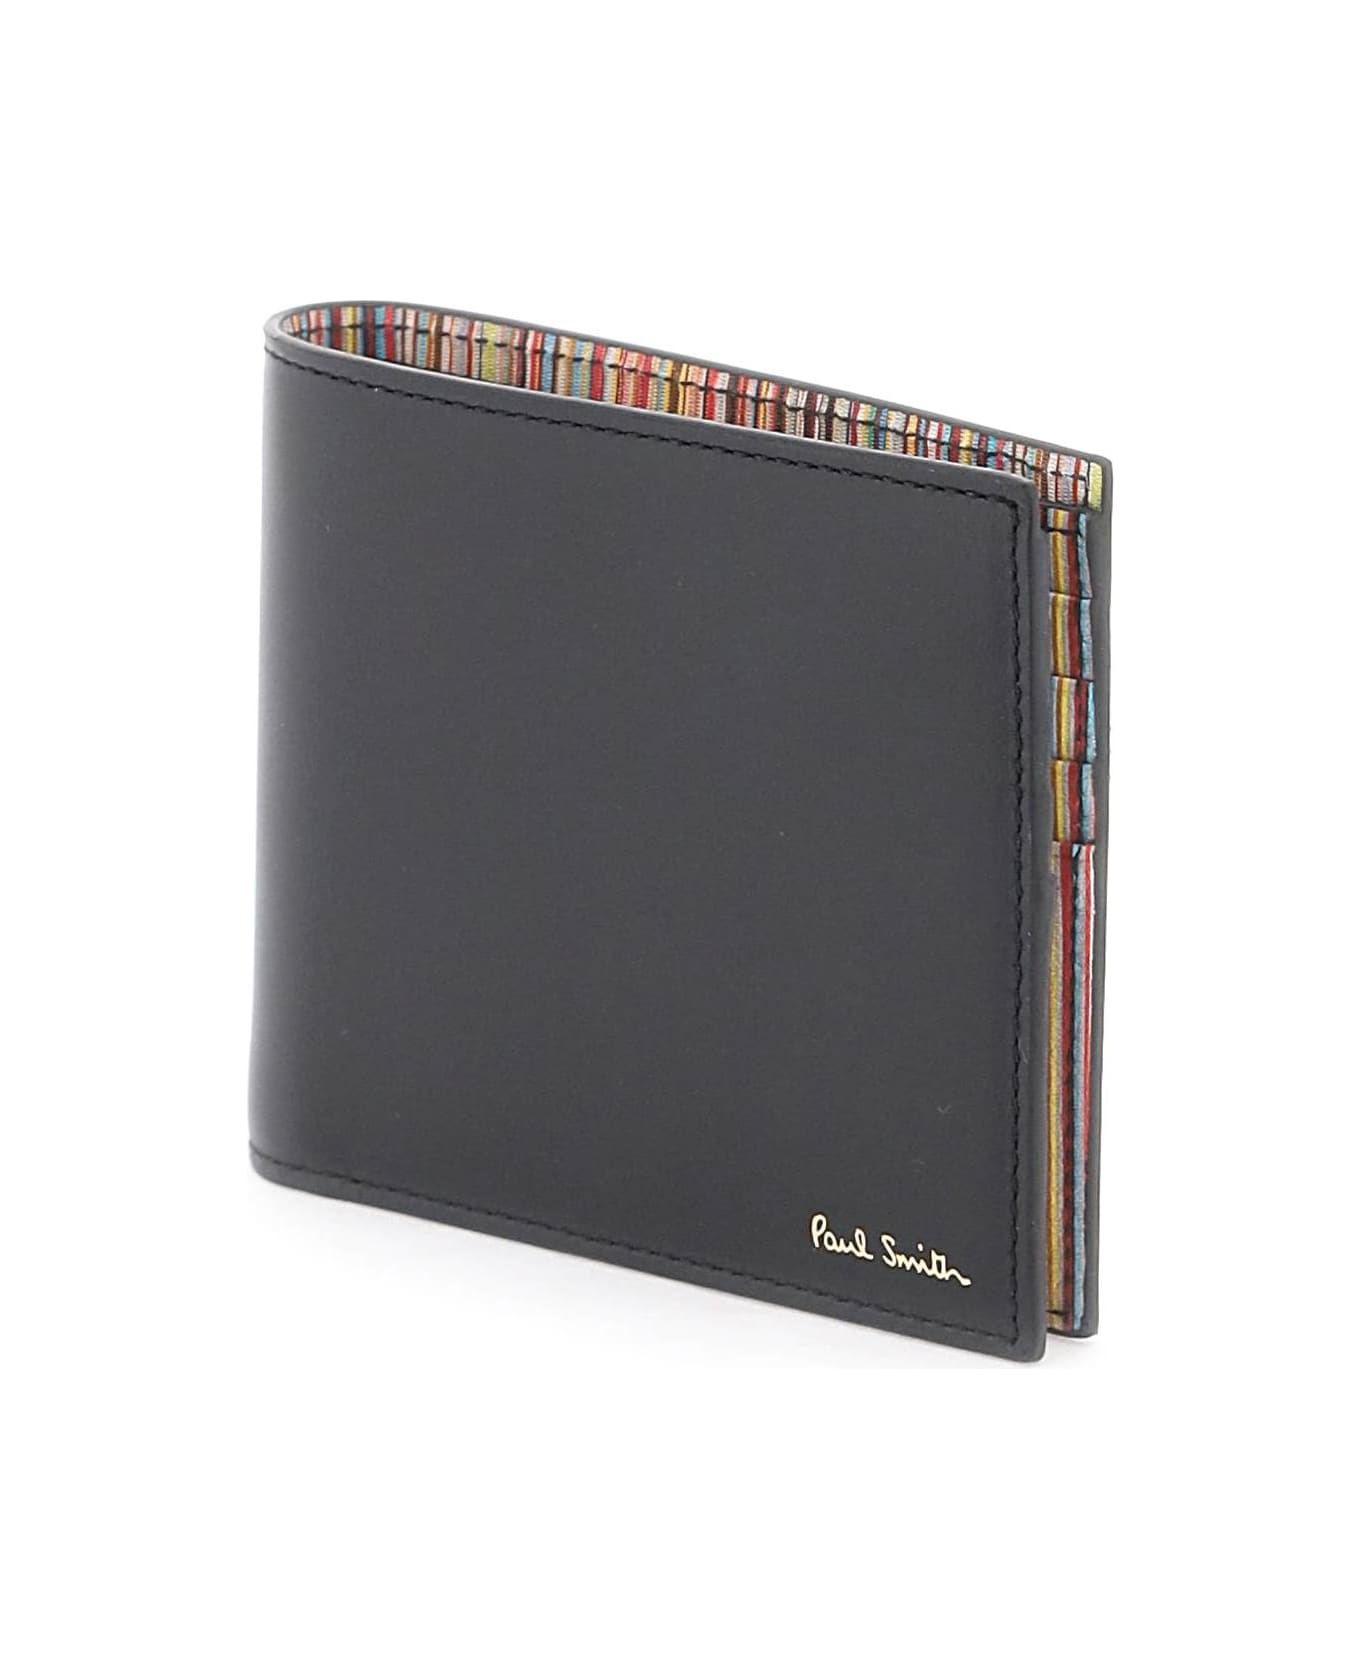 PS by Paul Smith Signature Stripe Wallet - Black